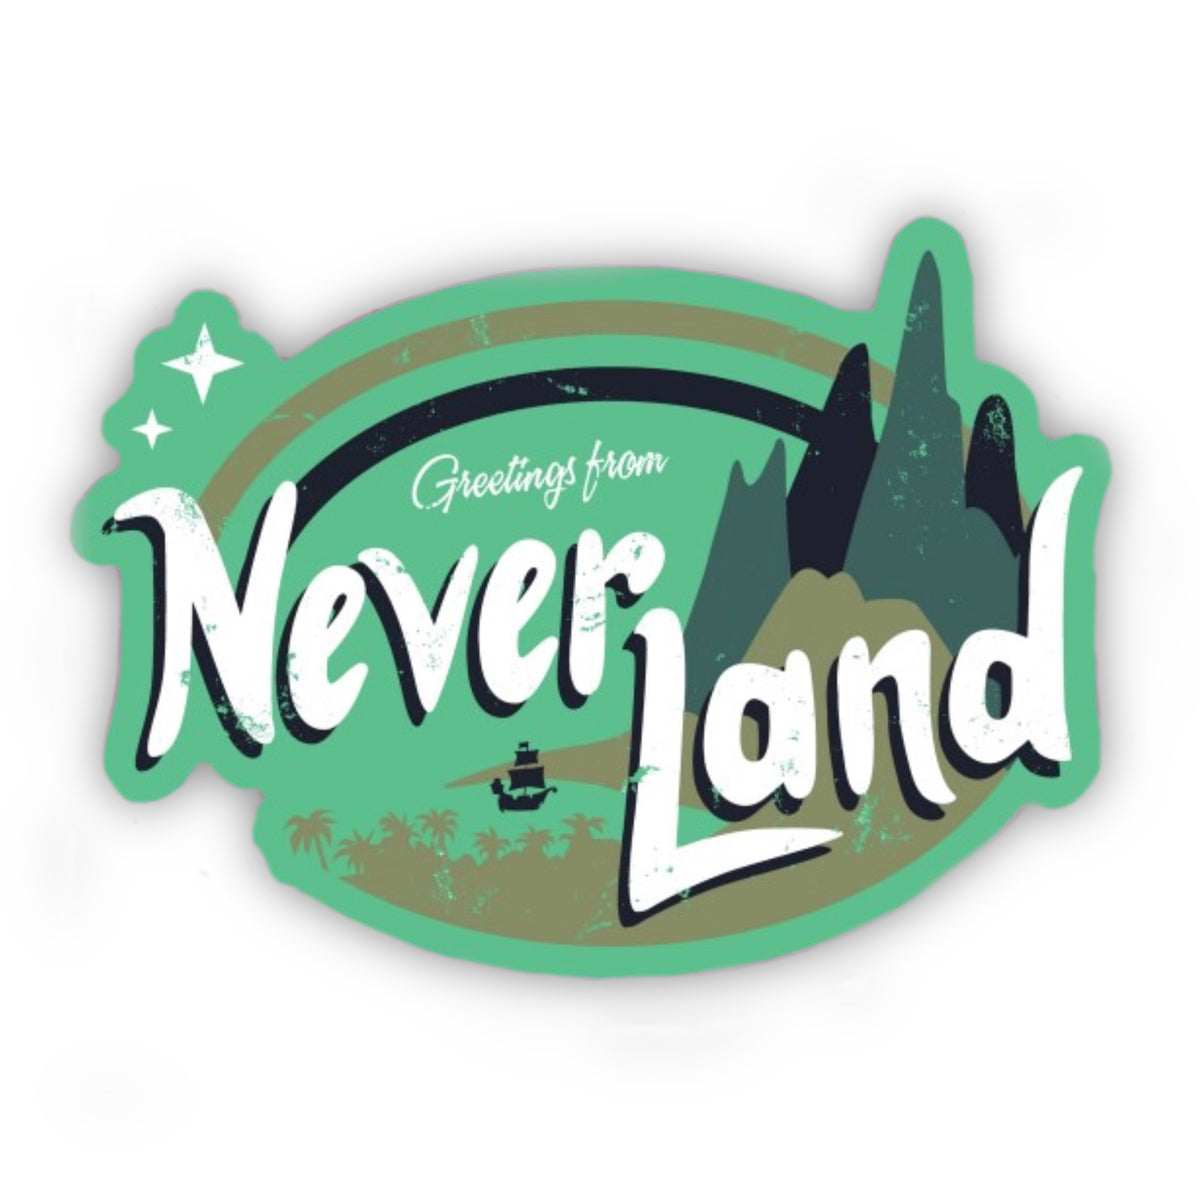 Greetings from Neverland Sticker